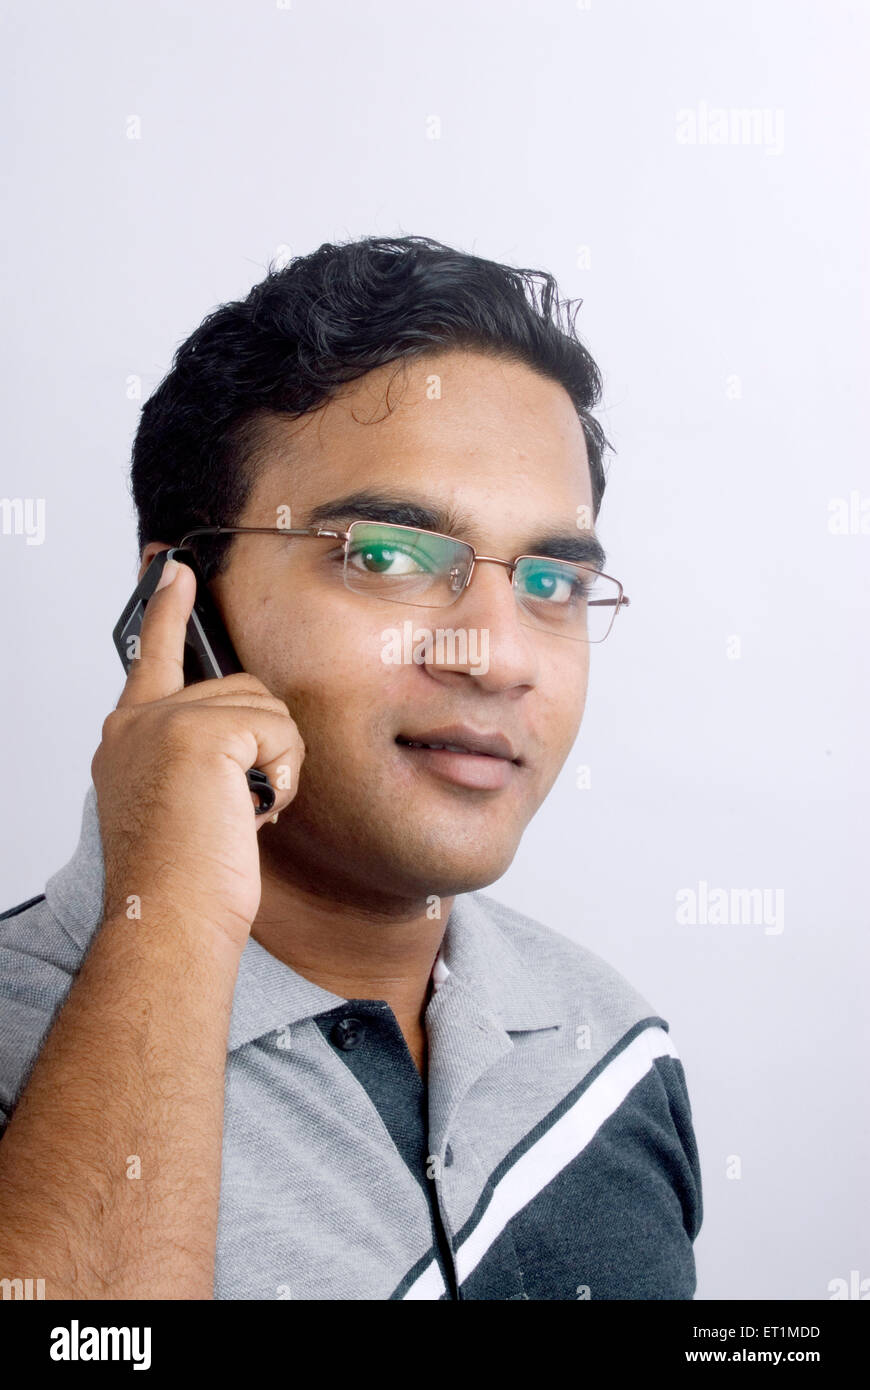 Young man using a mobile phone and smiling ; India MR#556 Stock Photo